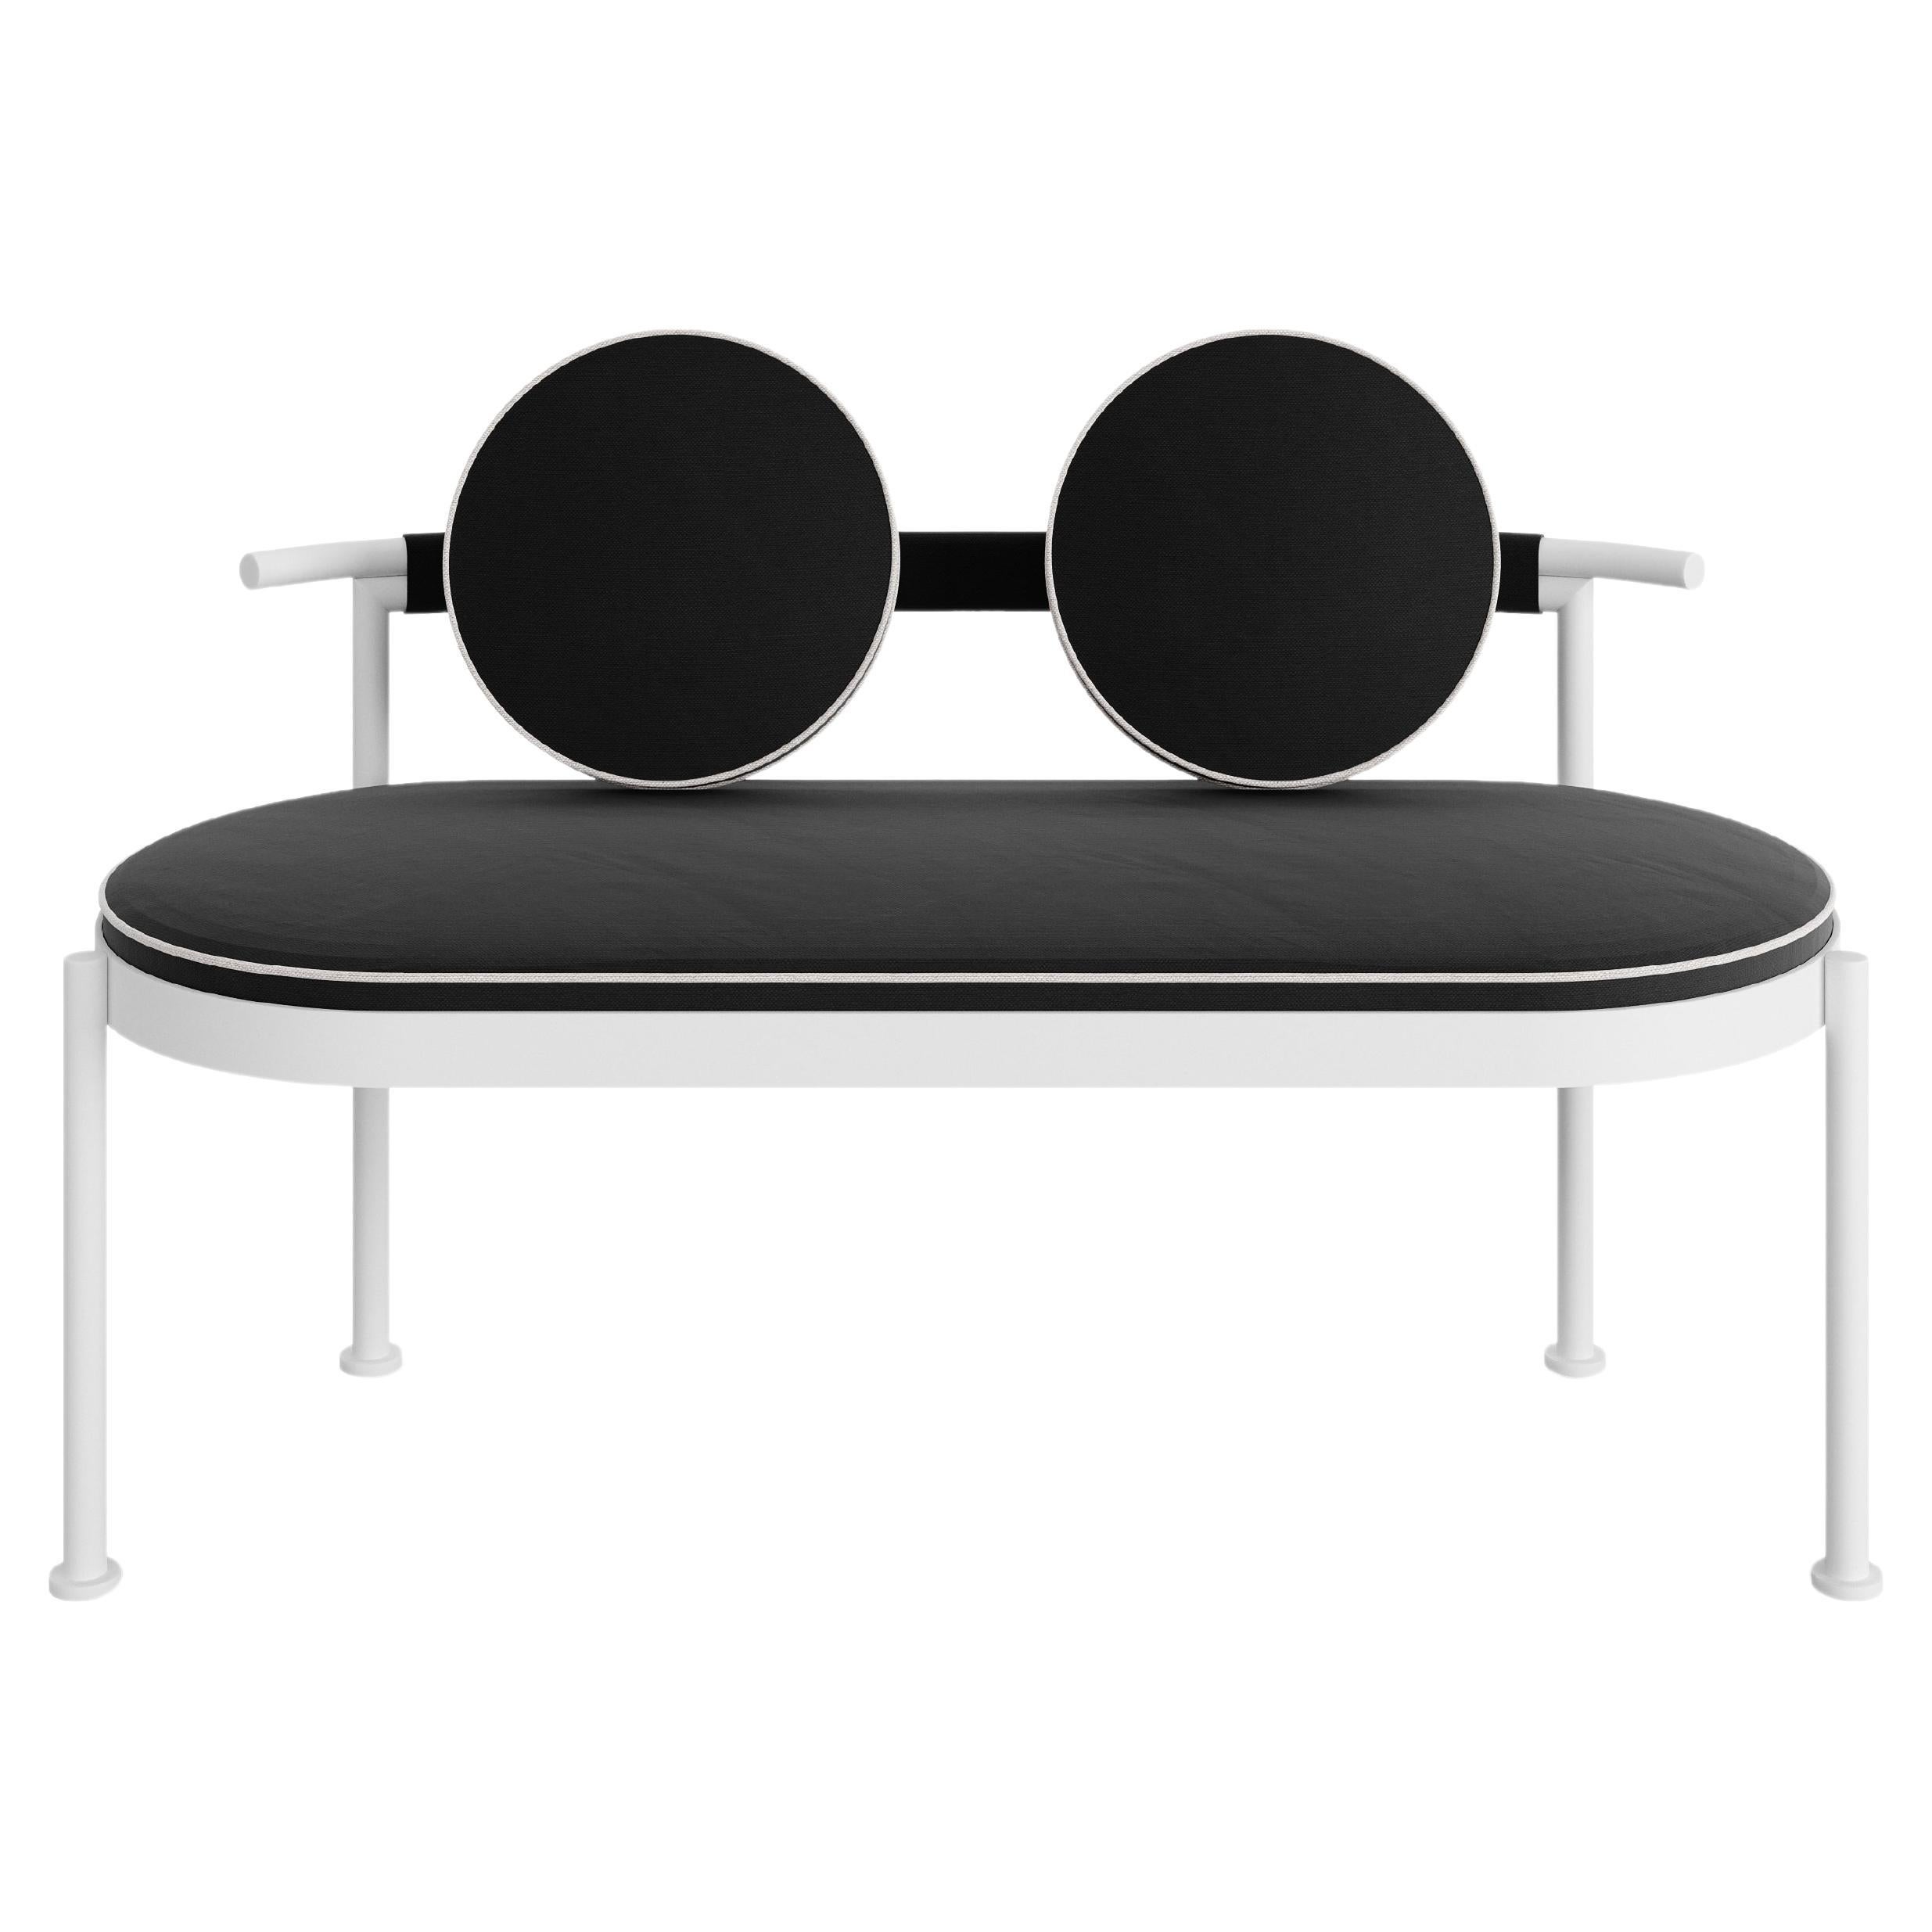 Bench with Back in Black Stainless Steel and Black Water-Resistant Fabric